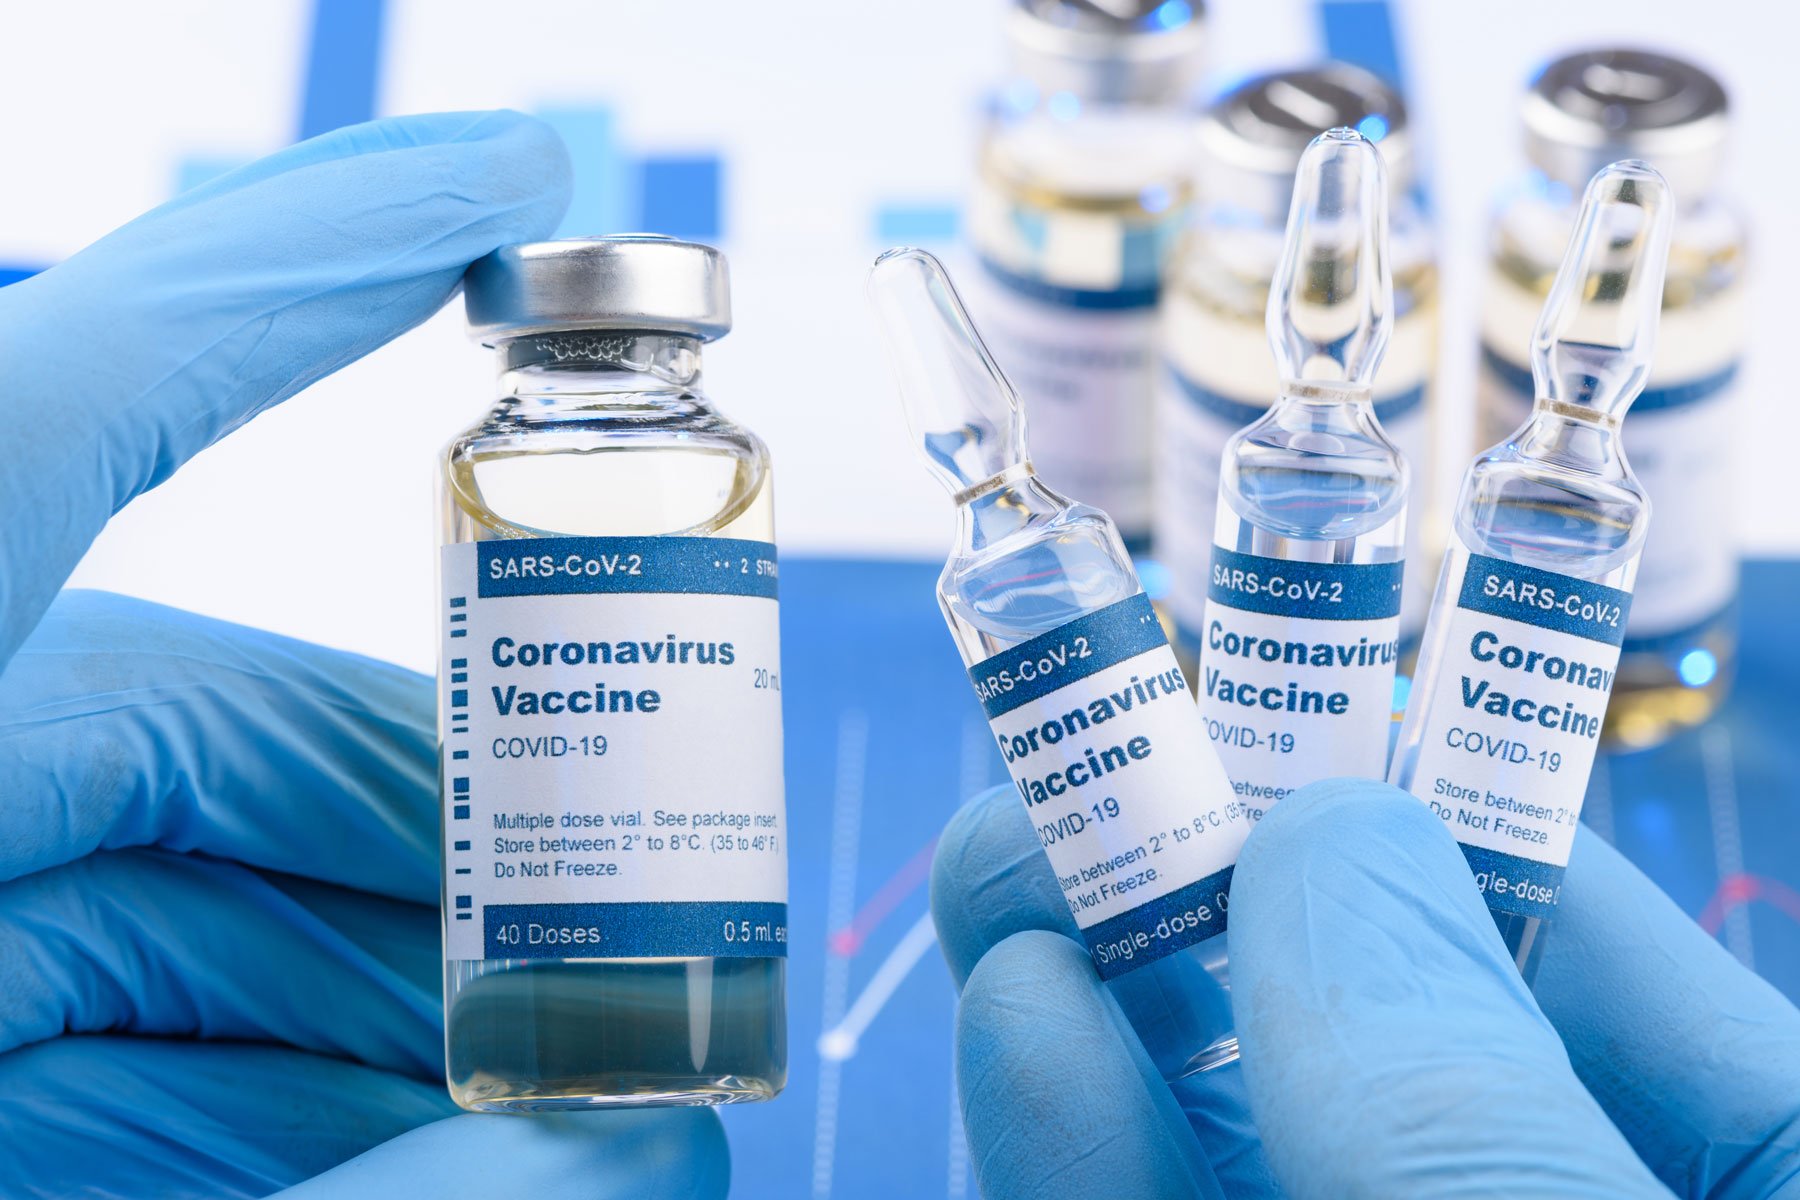 Pfizer applies for emergency approval of COVID-19 vaccine in the US